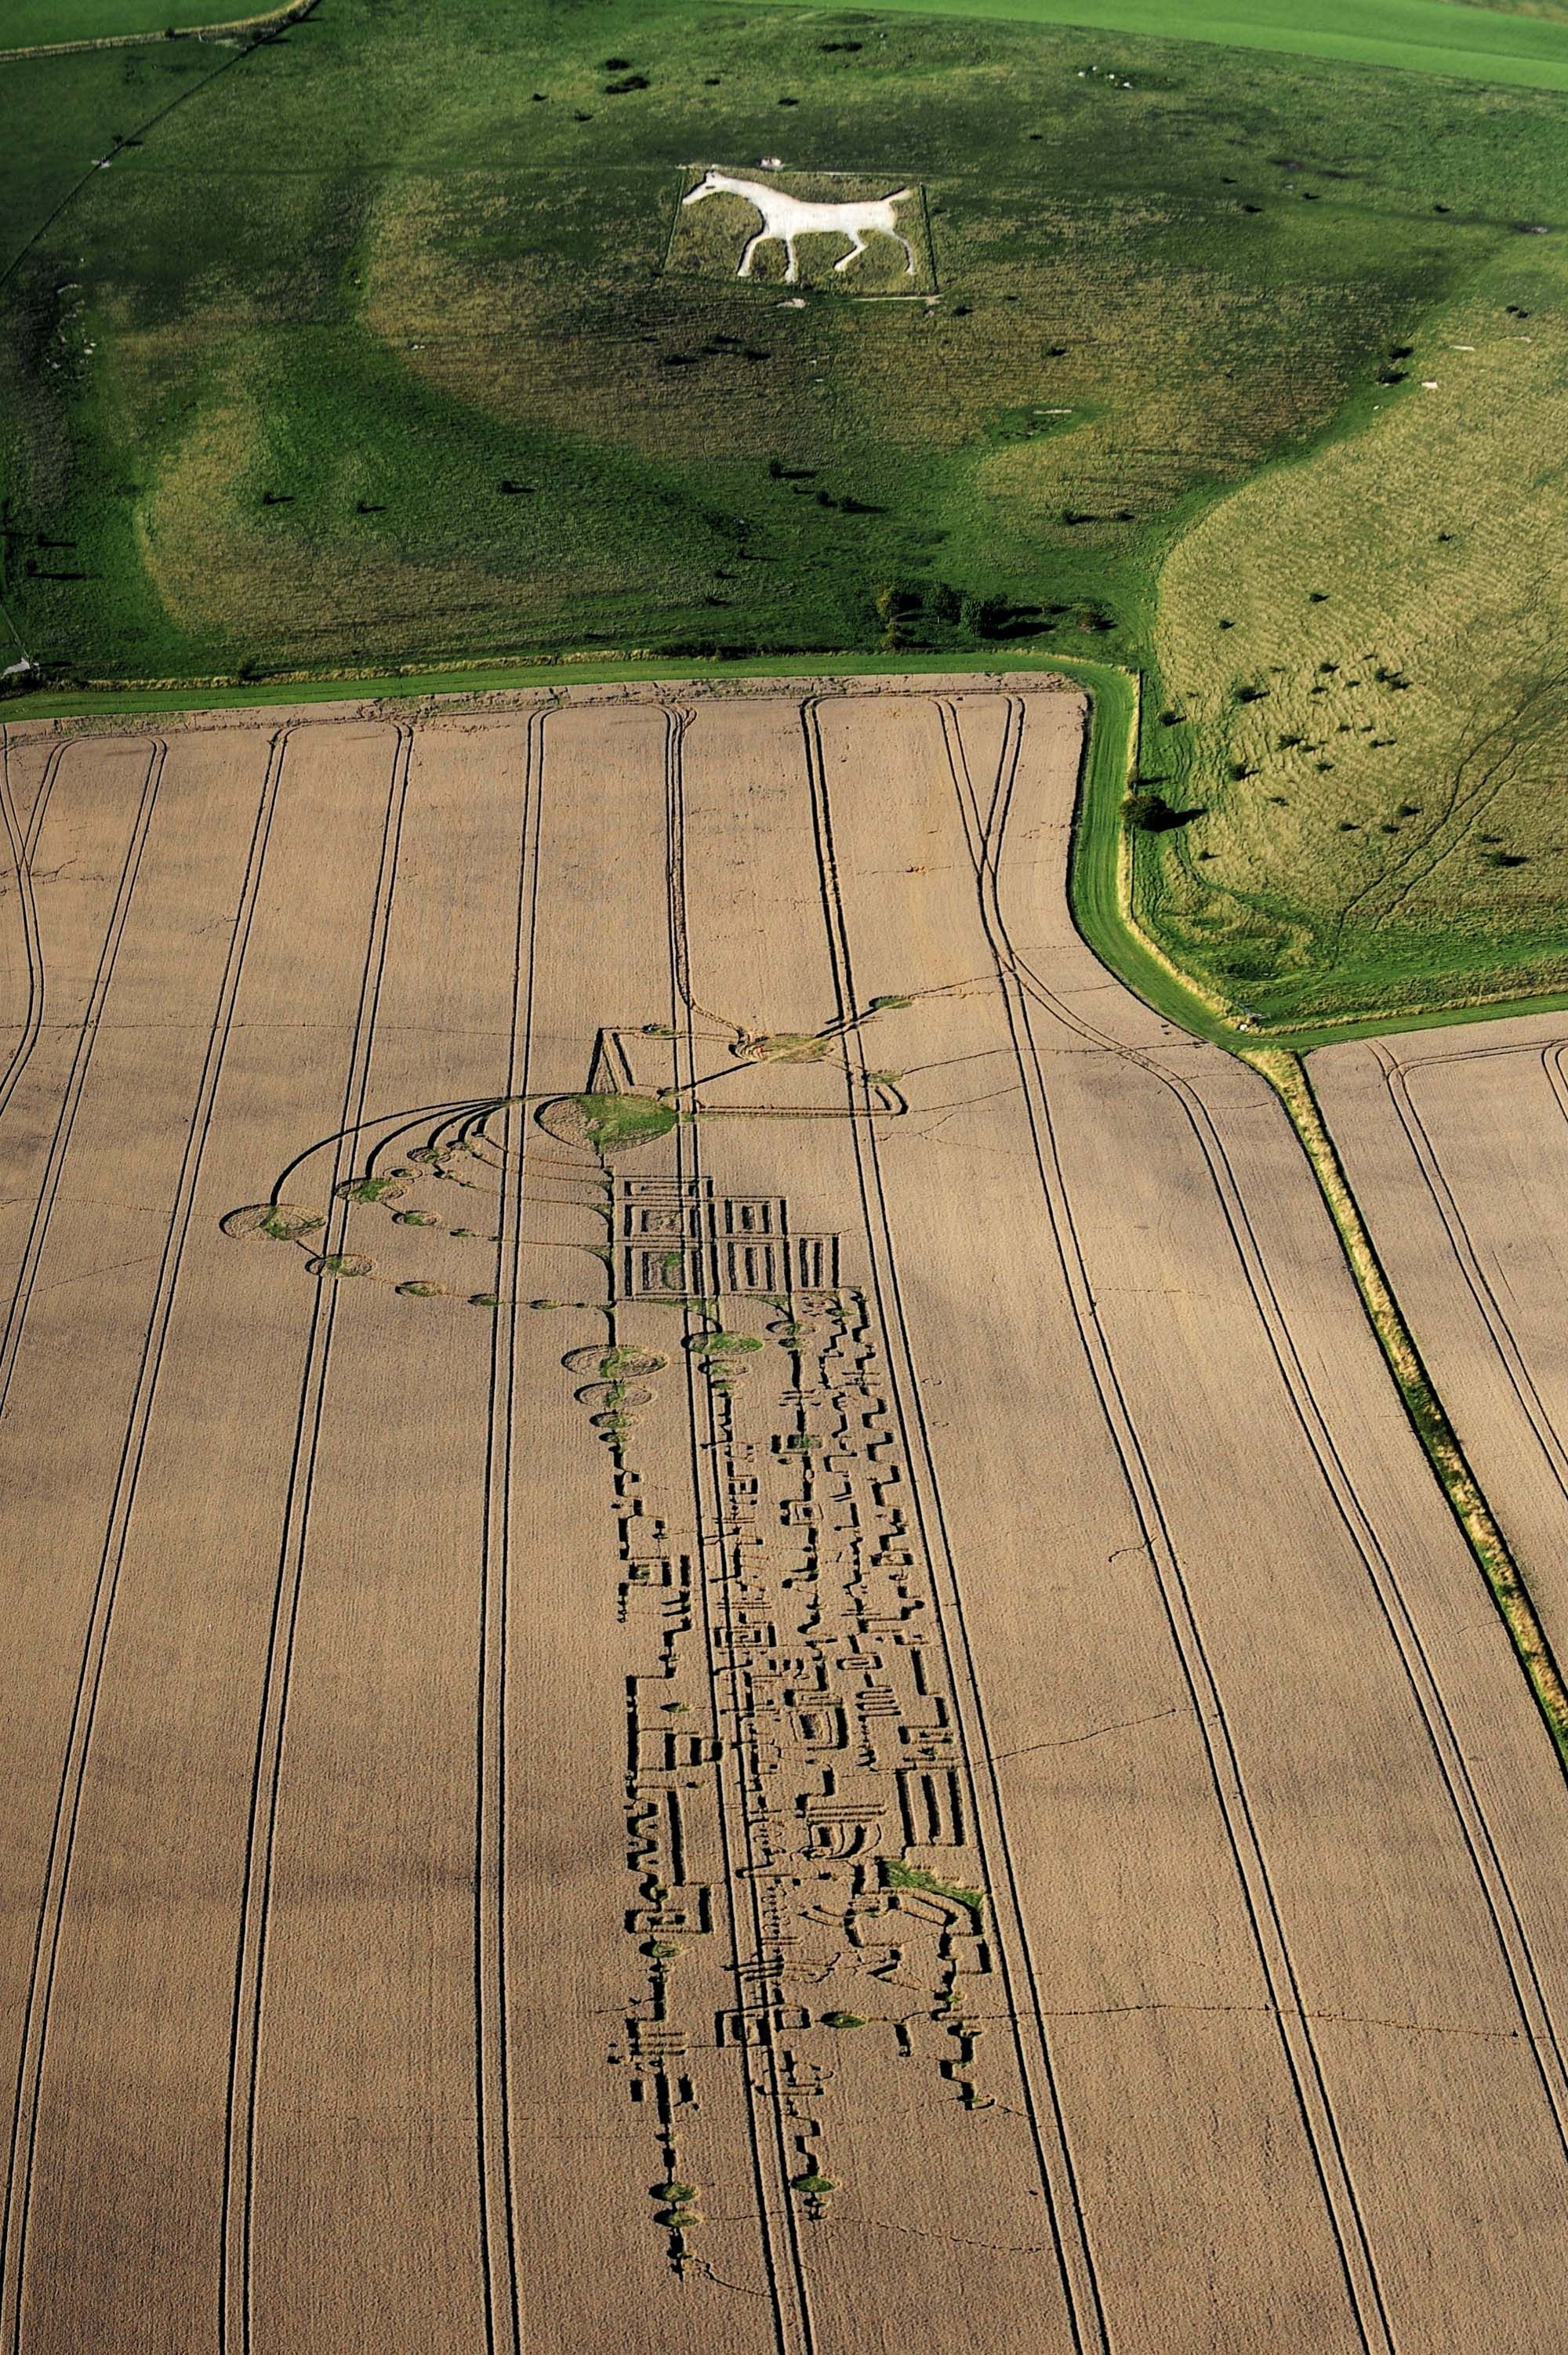 30 Stunning Crop Circles and Corn Mazes Photographed from Above